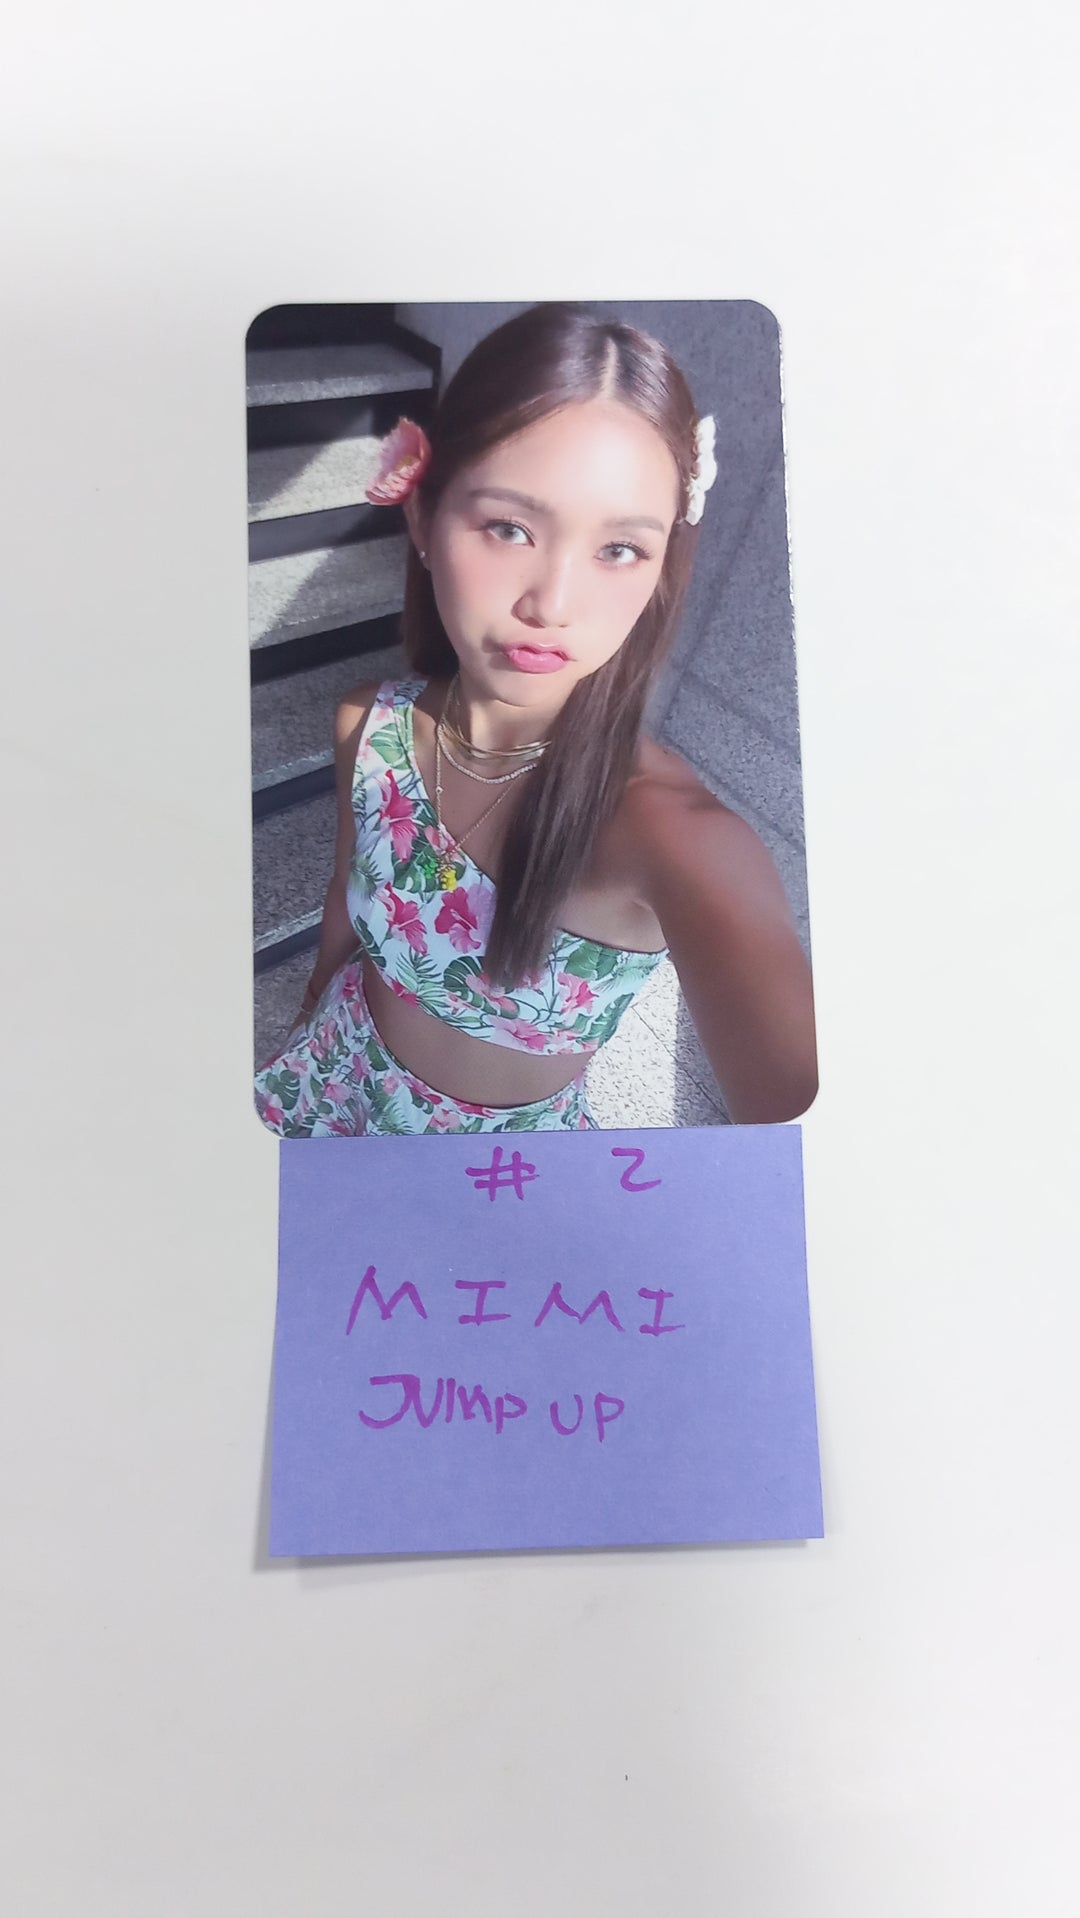 Oh My Girl "Golden Hourglass" - Jump Up Fansign Event Photocard Round 7 [23.09.14]